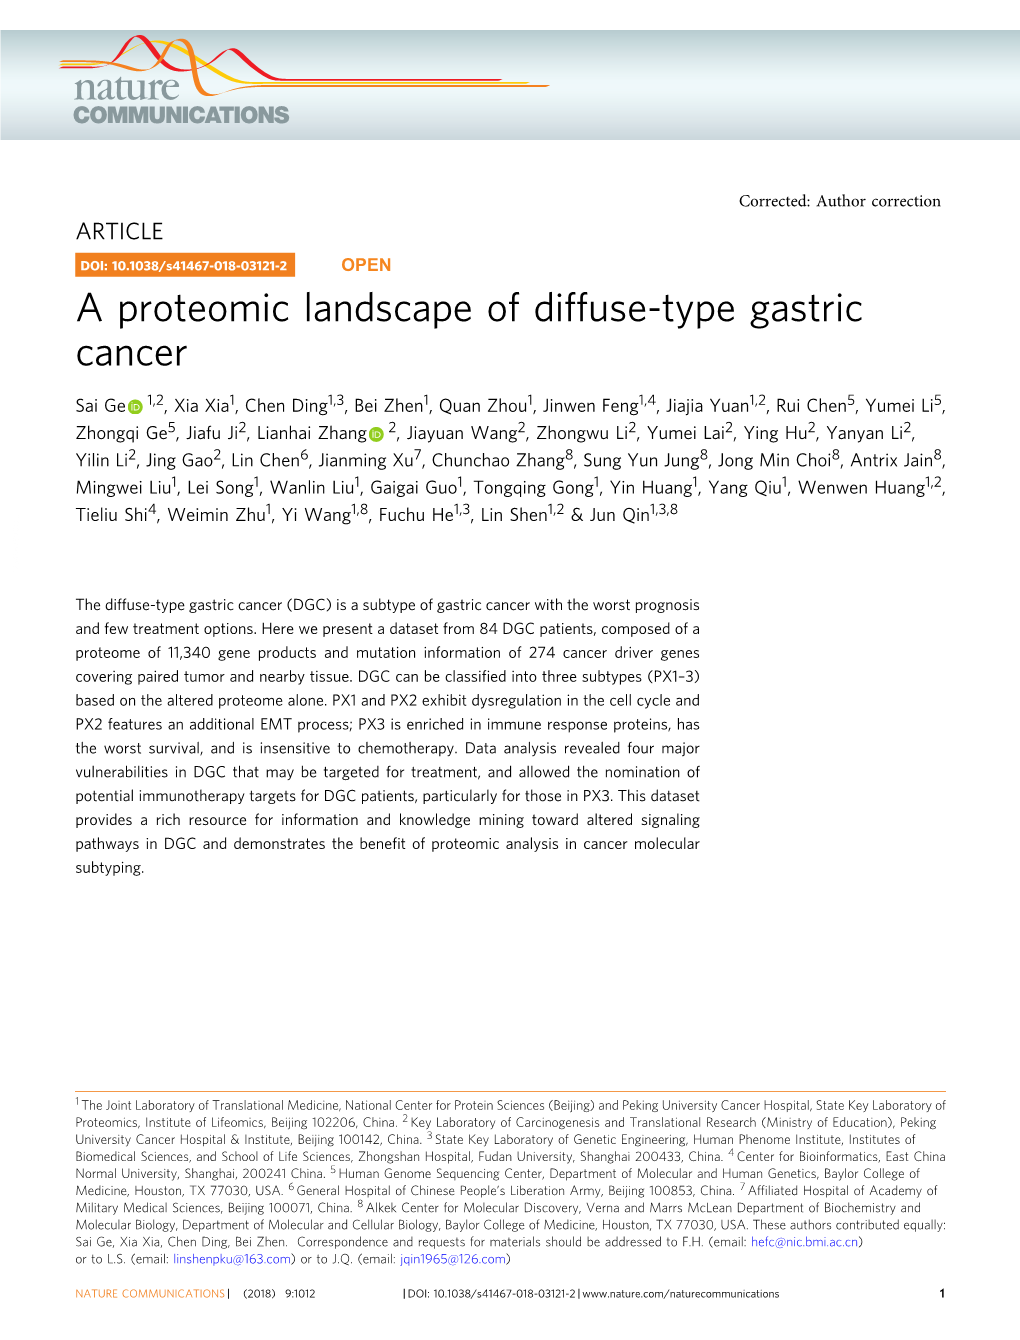 A Proteomic Landscape of Diffuse-Type Gastric Cancer